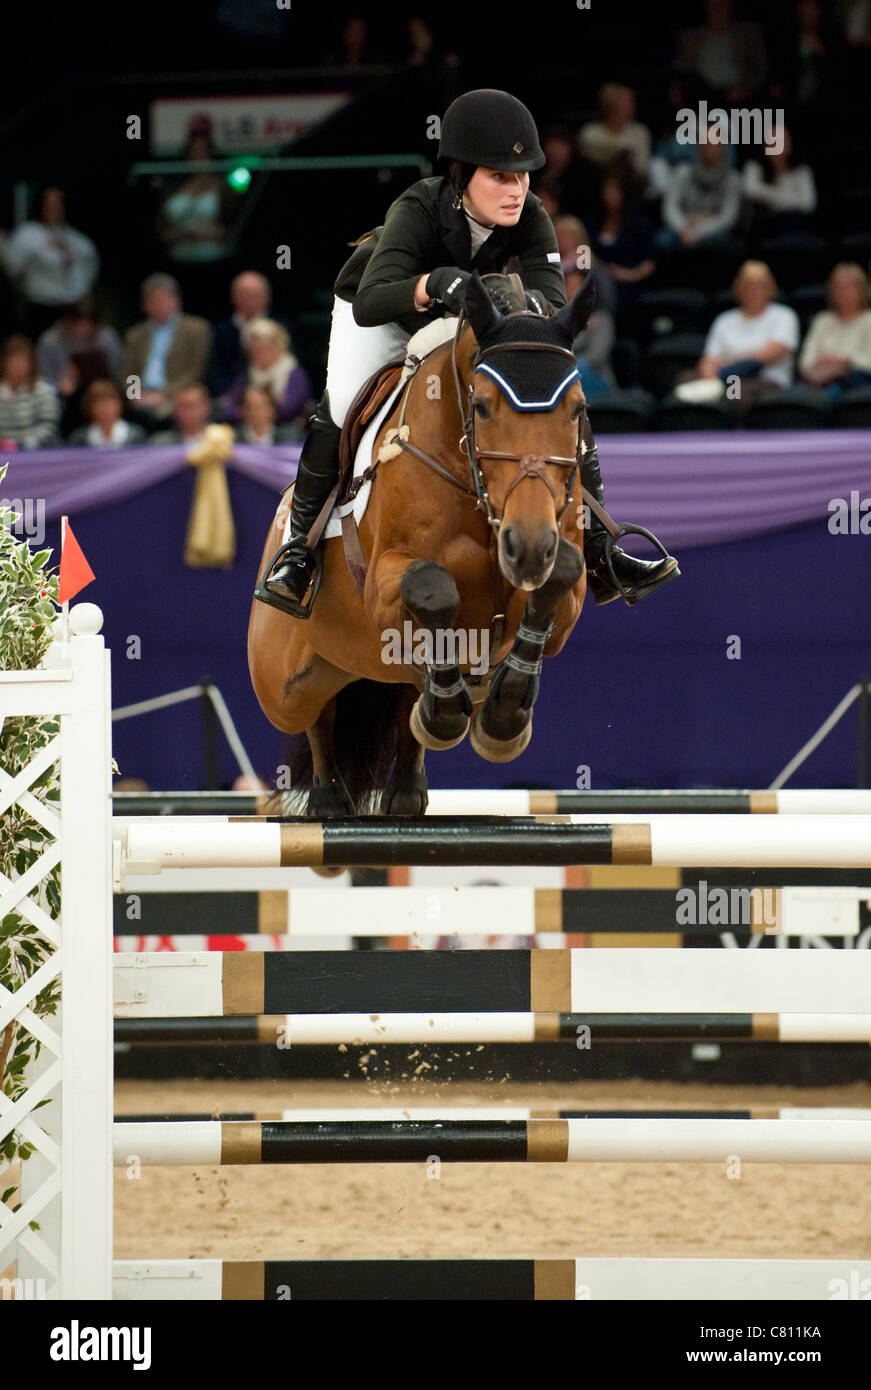 N.E.C. Birmingham, England. Jessica Springsteen, daughter of Bruce Springsteen,  and the Horse of the Year Show Stock Photo